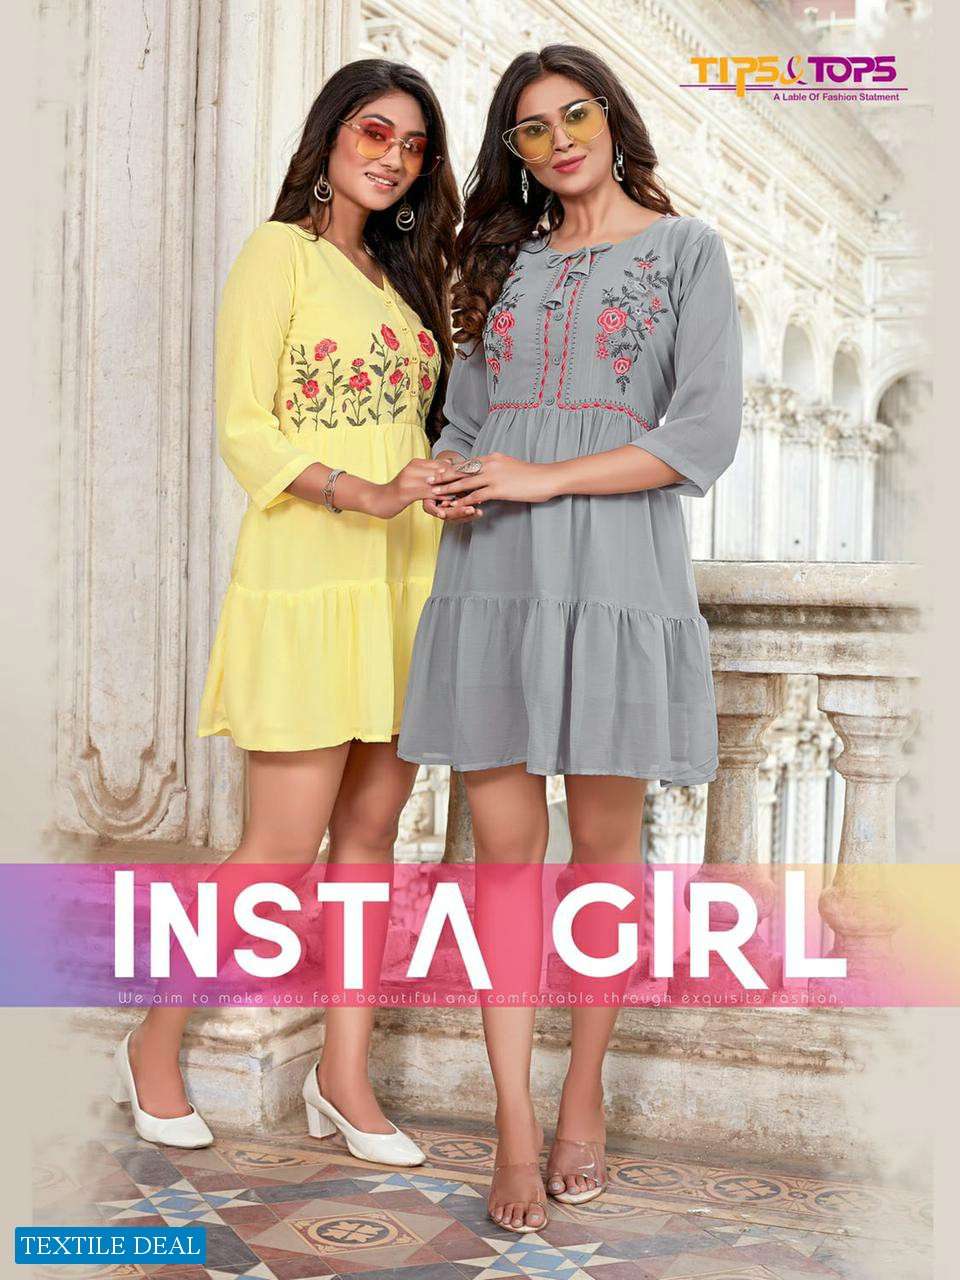 TIPS & TOPS INSTA GIRL SHORT TOPS FOR GIRLS WHOLESALE RATE IN SURAT - SAIDHARANX